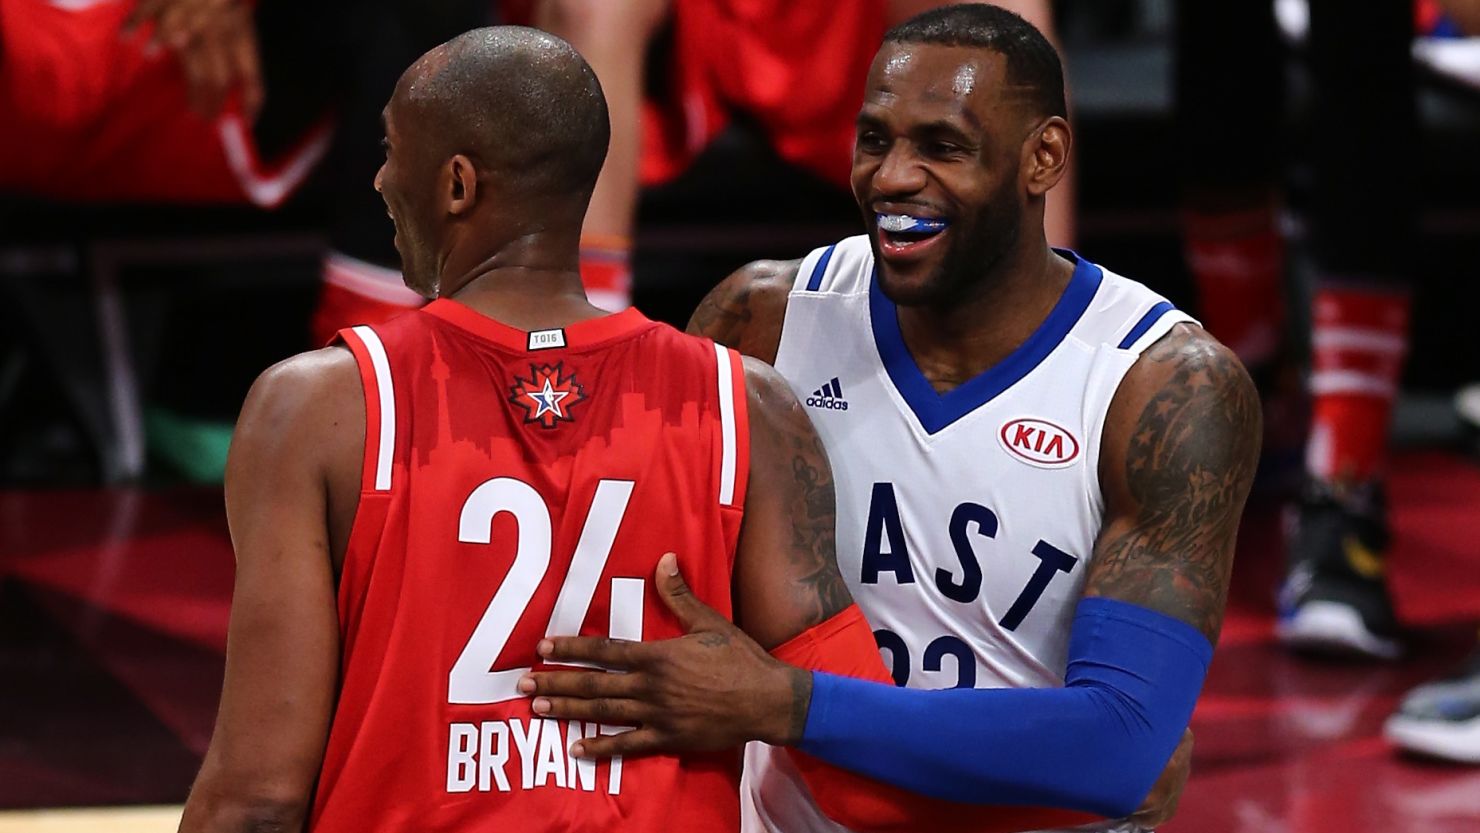 LeBron James (right) with Kobe Bryant during the 2016 NBA All-Star Game in Toronto.   